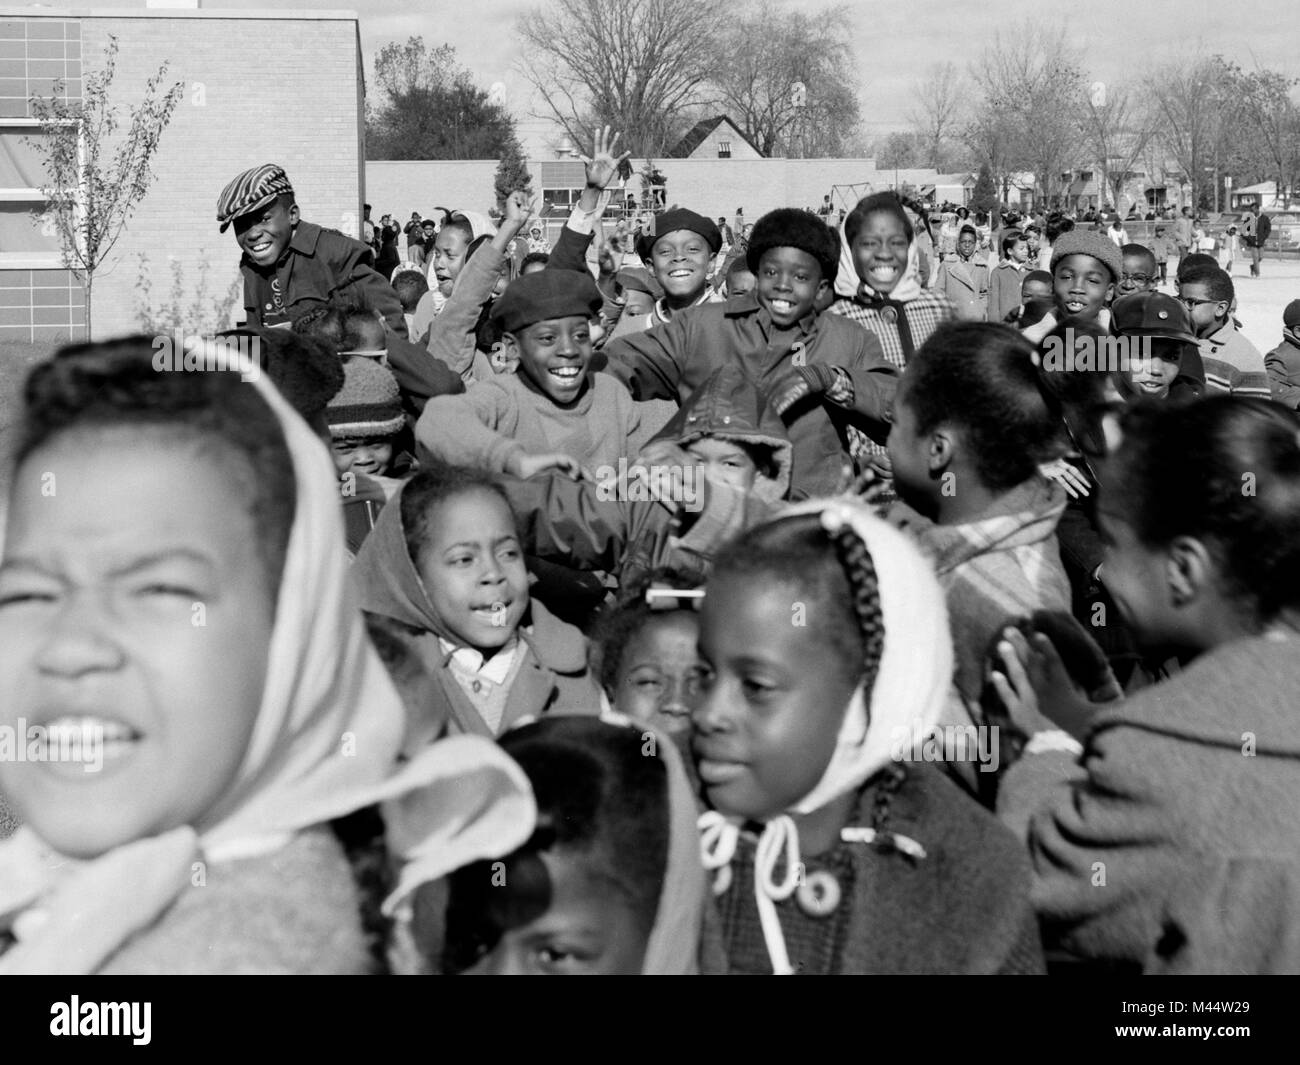 School playground on Chicago’s South Side, ca. 1965. File name: Stock Photo